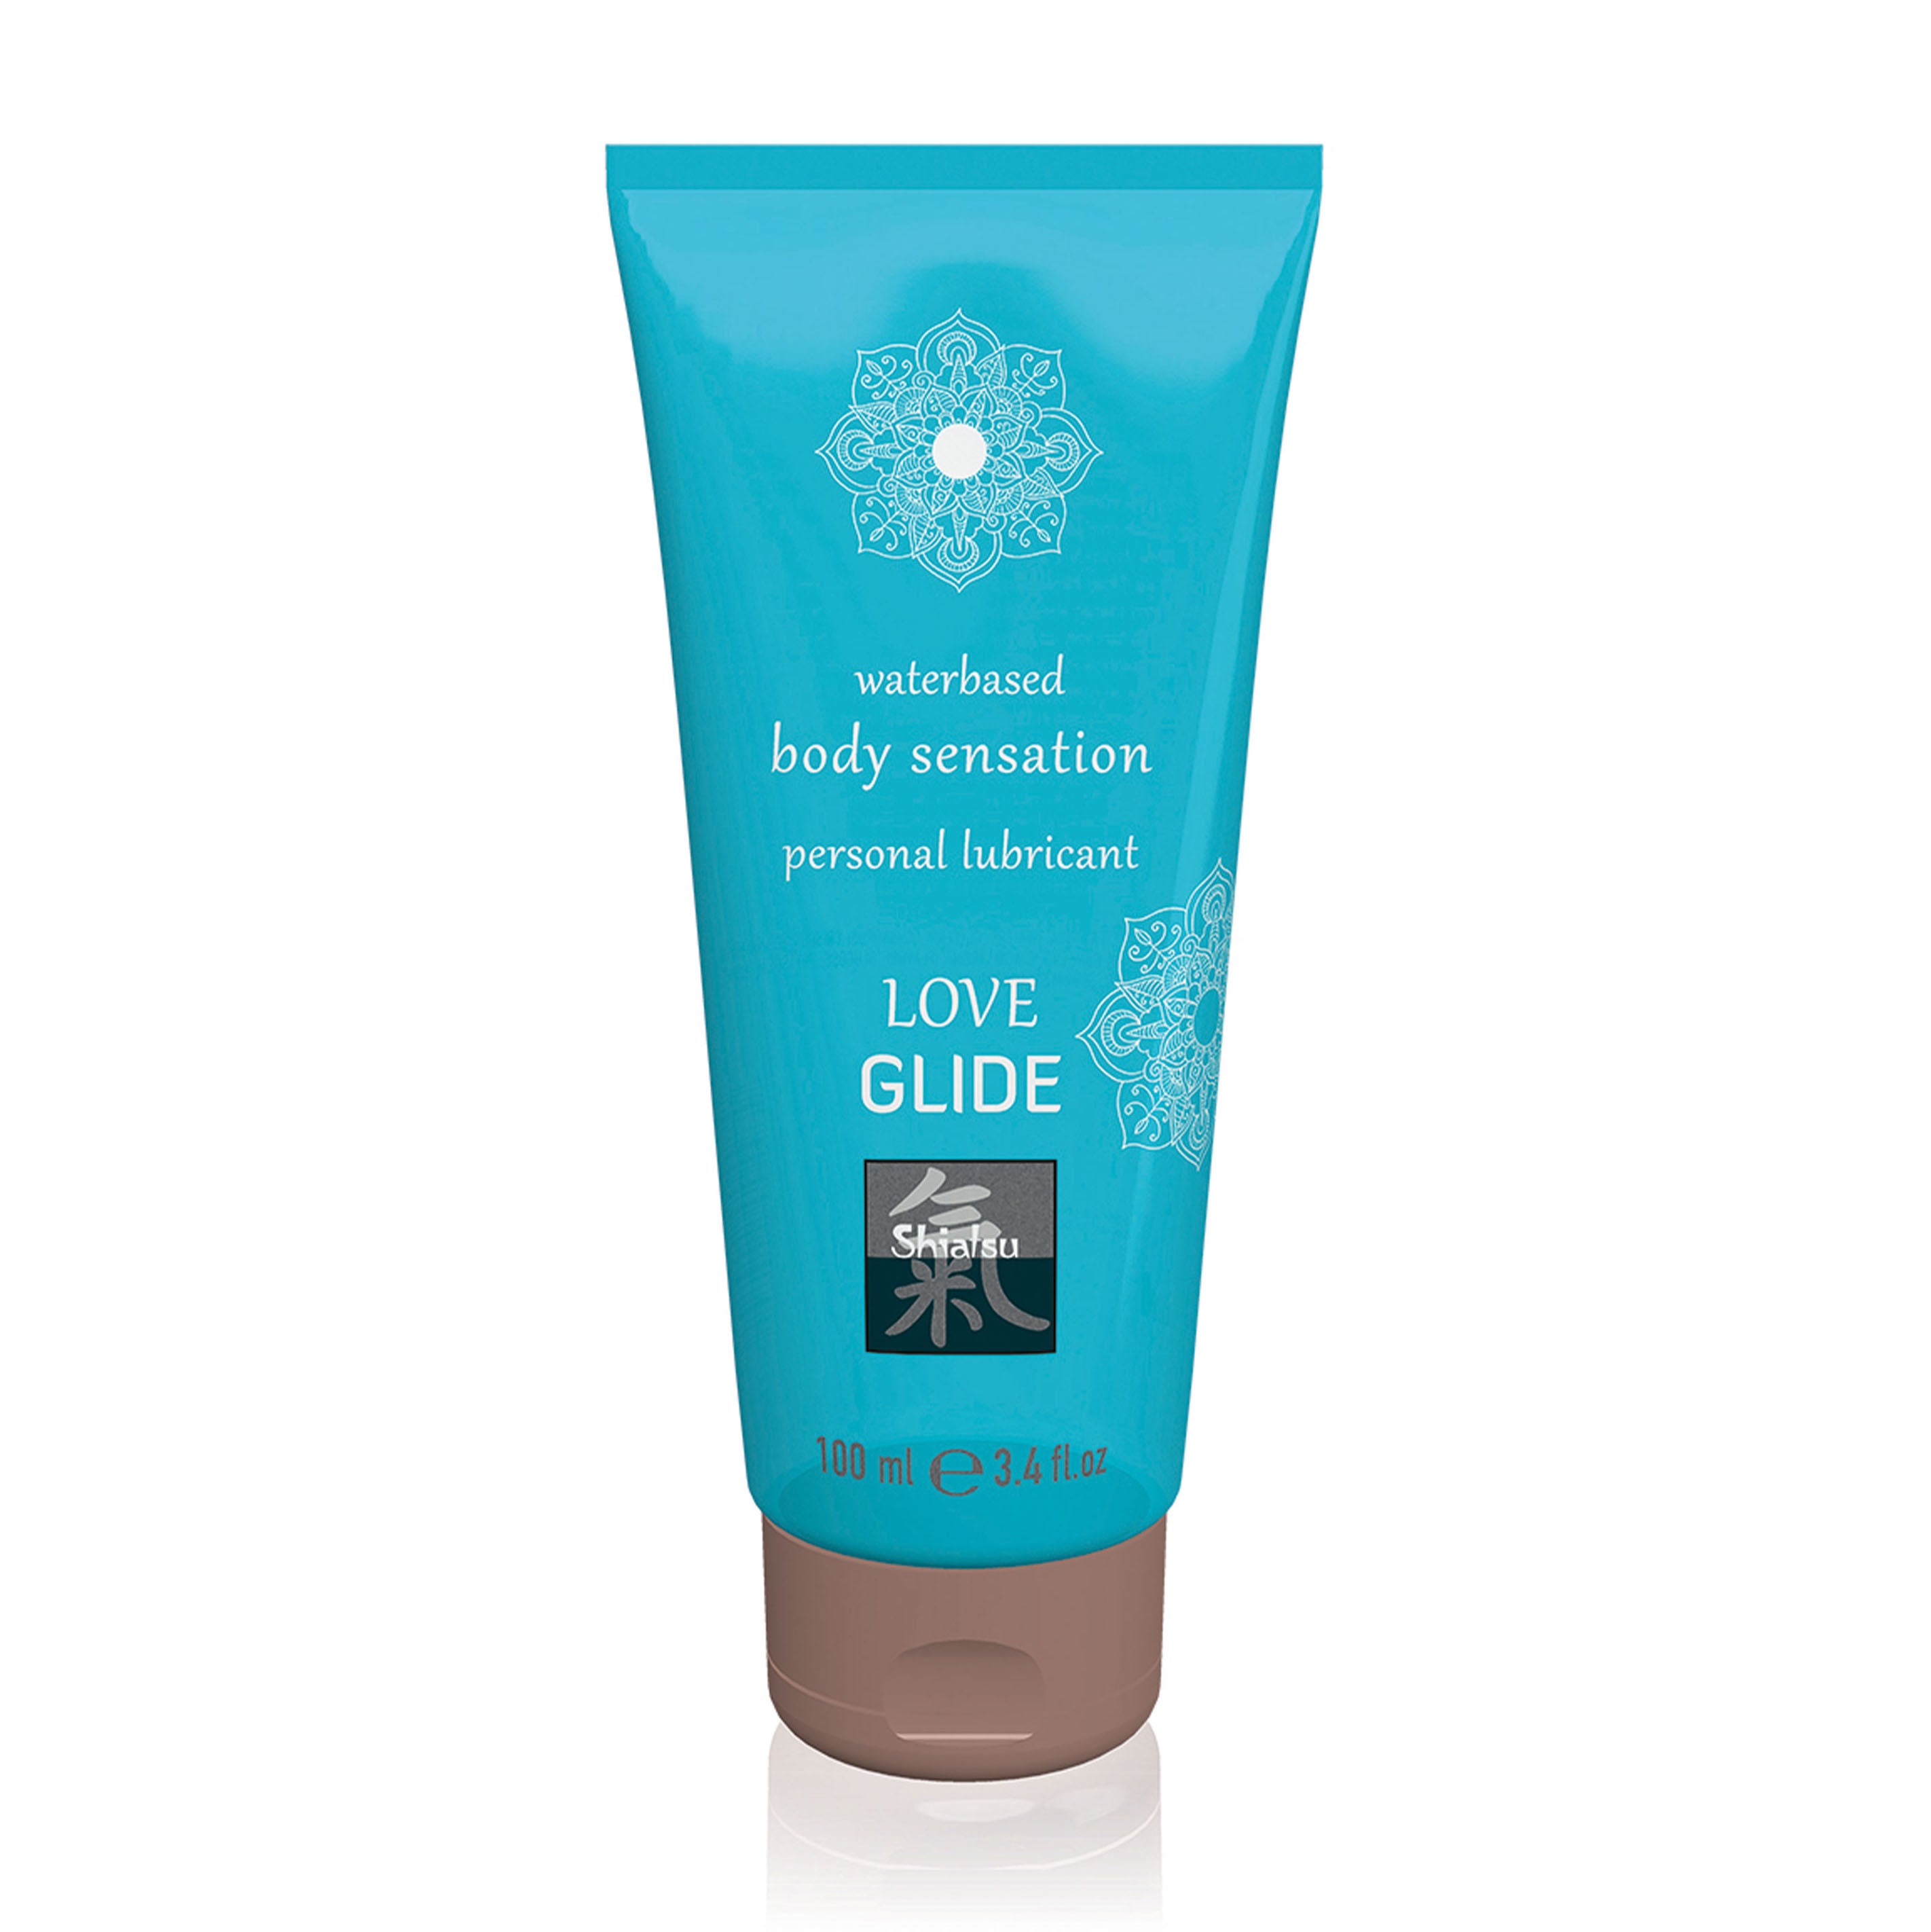 Shiatsu Love Glide WaterBased Personal Lubricant 100ml > Relaxation Zone > Lubricants and Oils 75ml, Both, Lubricants and Oils, NEWLY-IMPORTED - So Luxe Lingerie